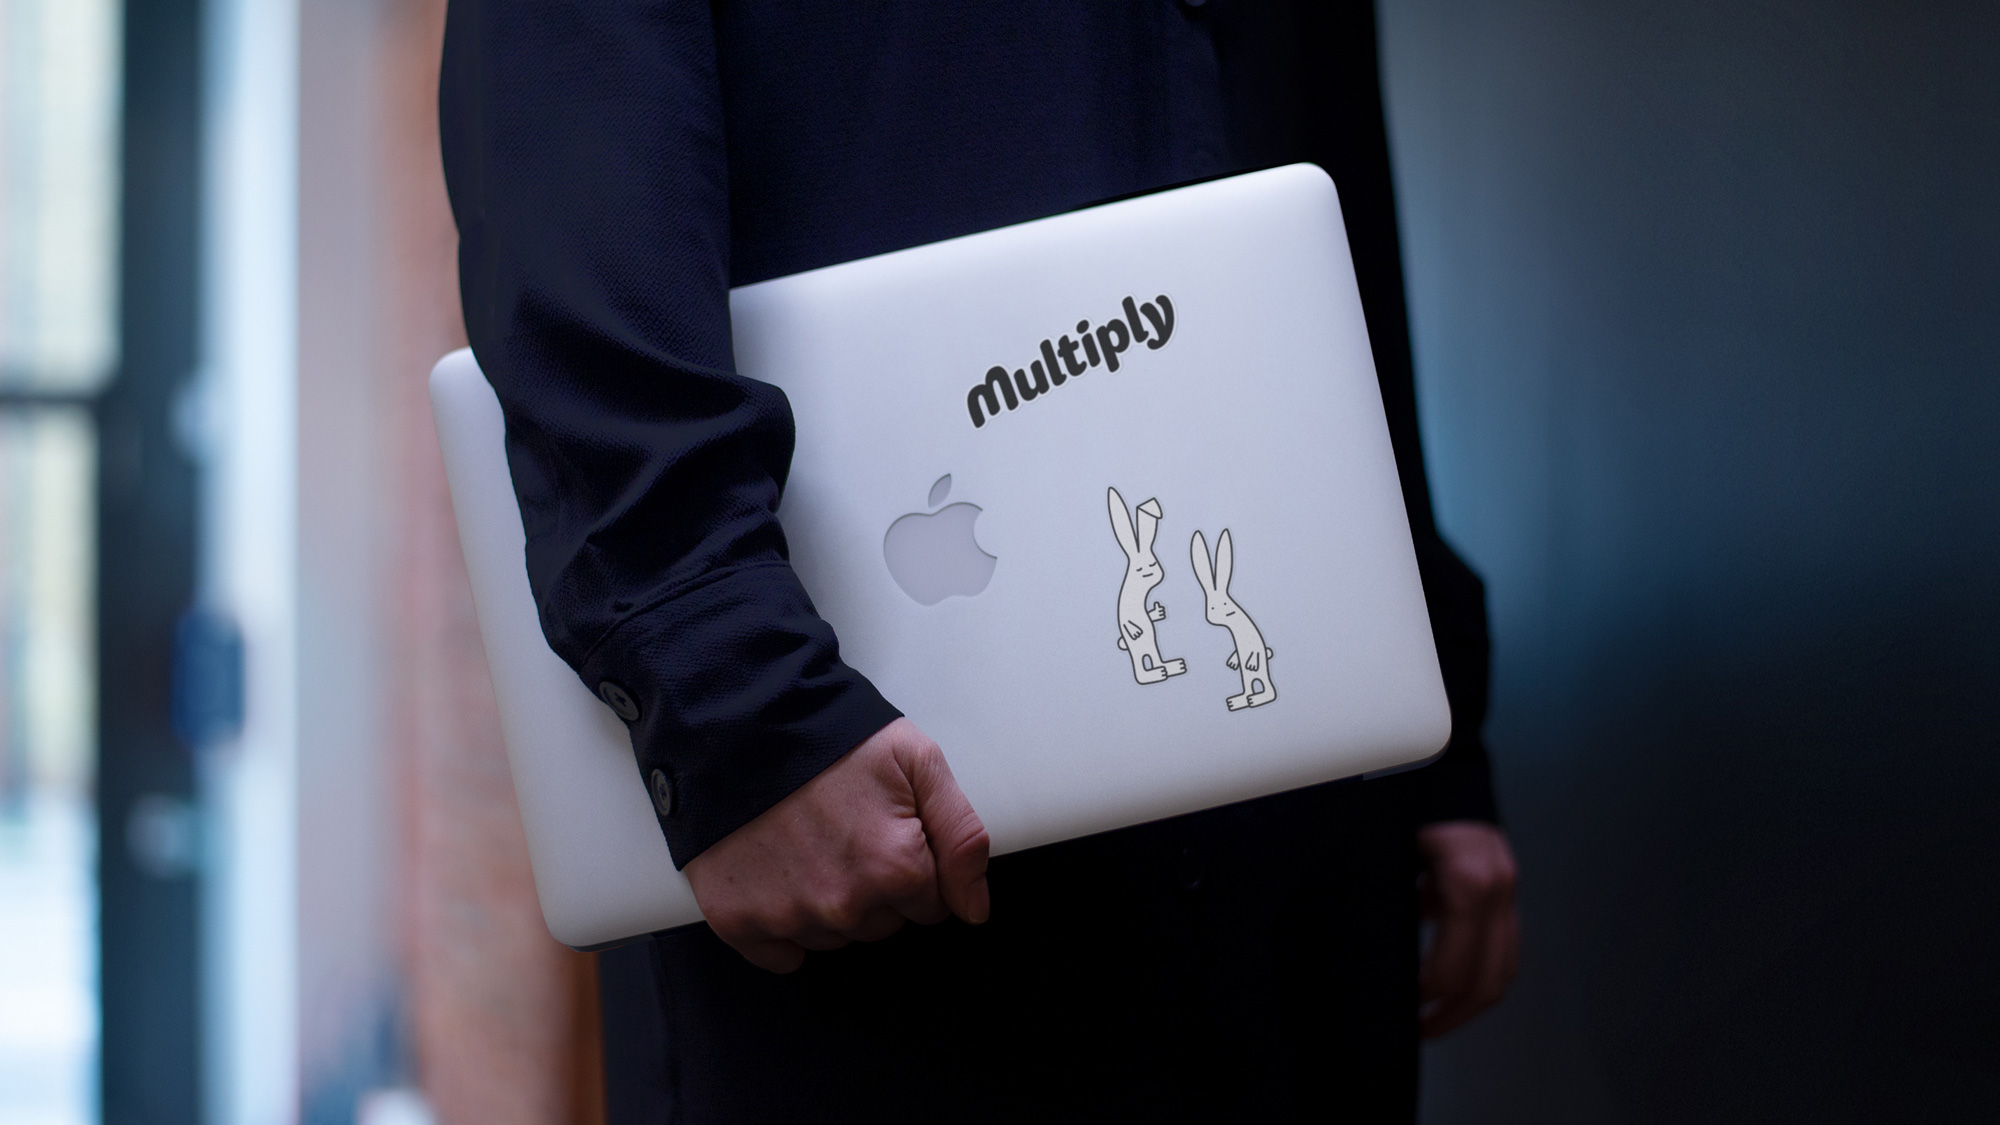 New Logo and Identity for Multiply by Ragged Edge